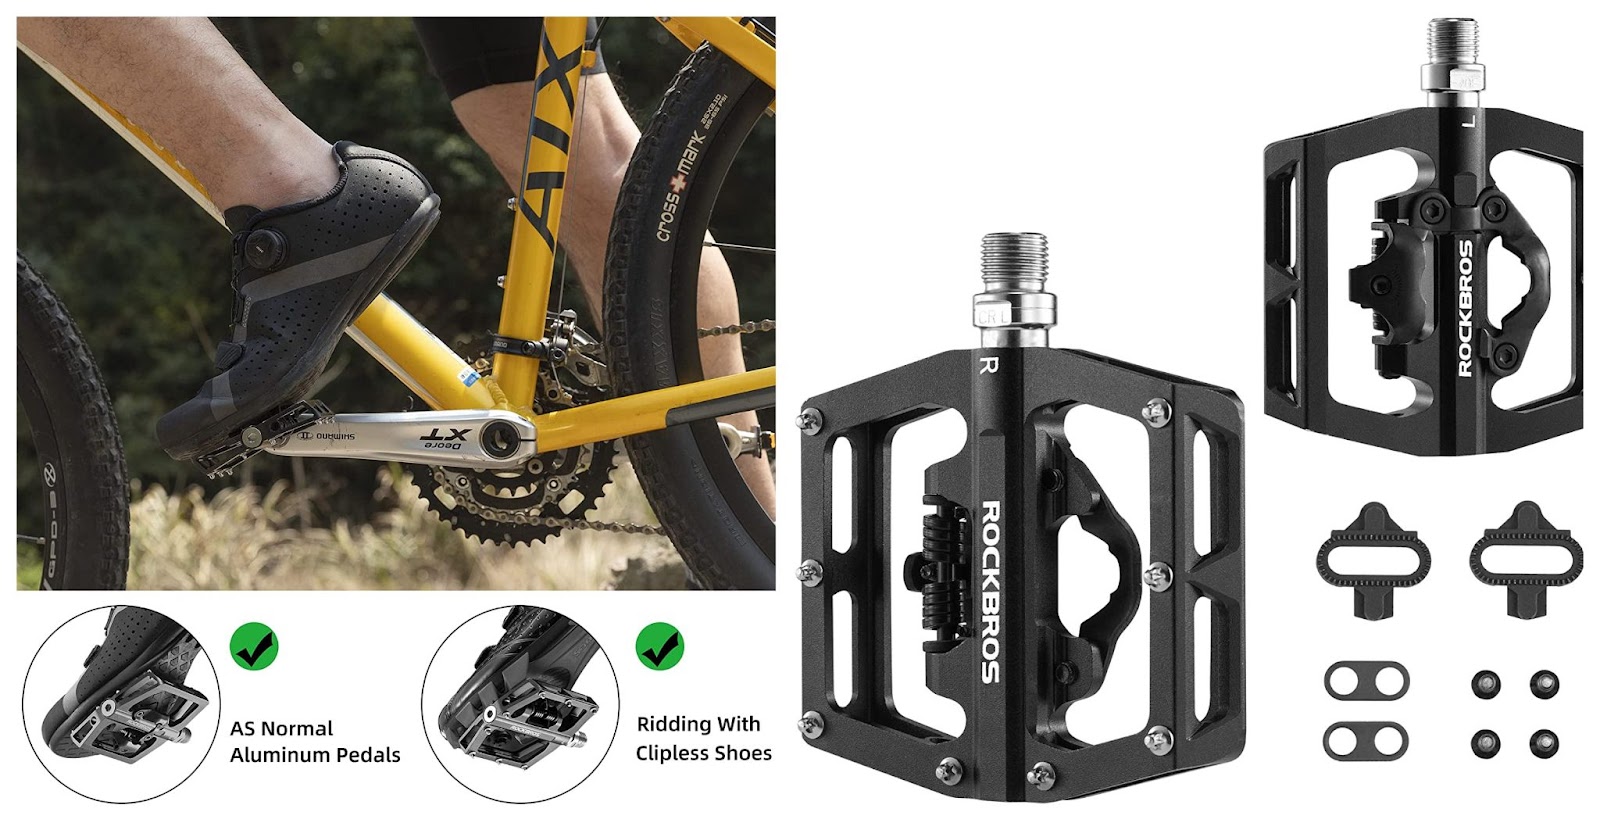 Although clipless pedals are a great option for cyclists, toe clips can provide the same benefits.